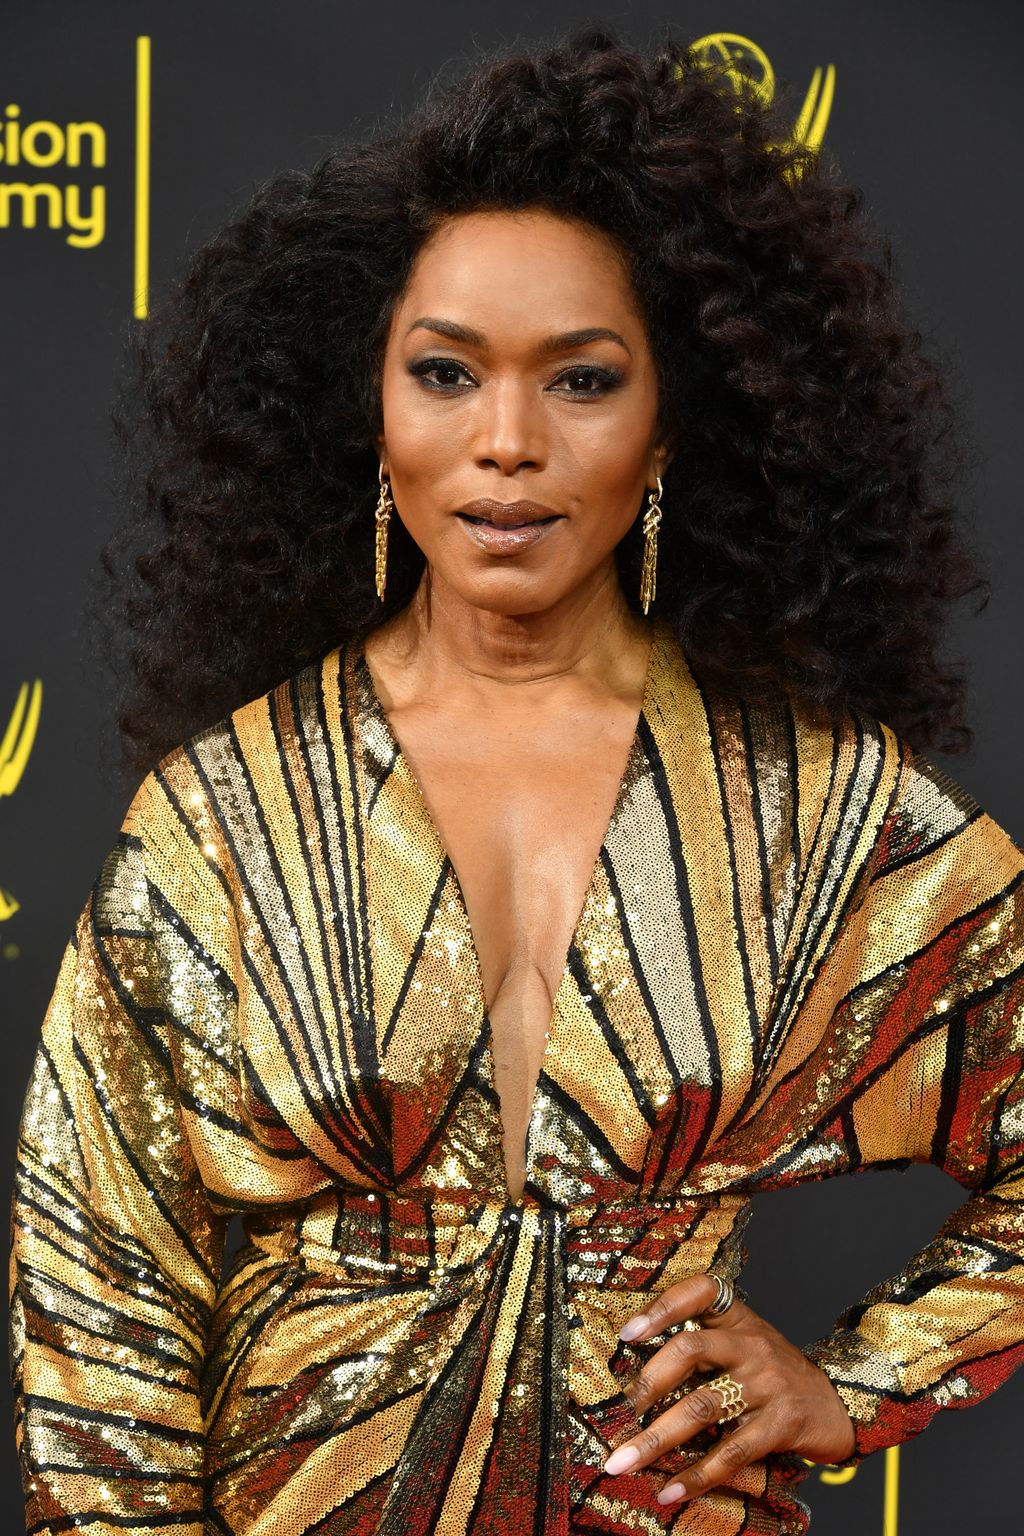 2019 Creative Arts Emmy Awards - Arrivals GettyImageRank2 arts culture and entertainment 